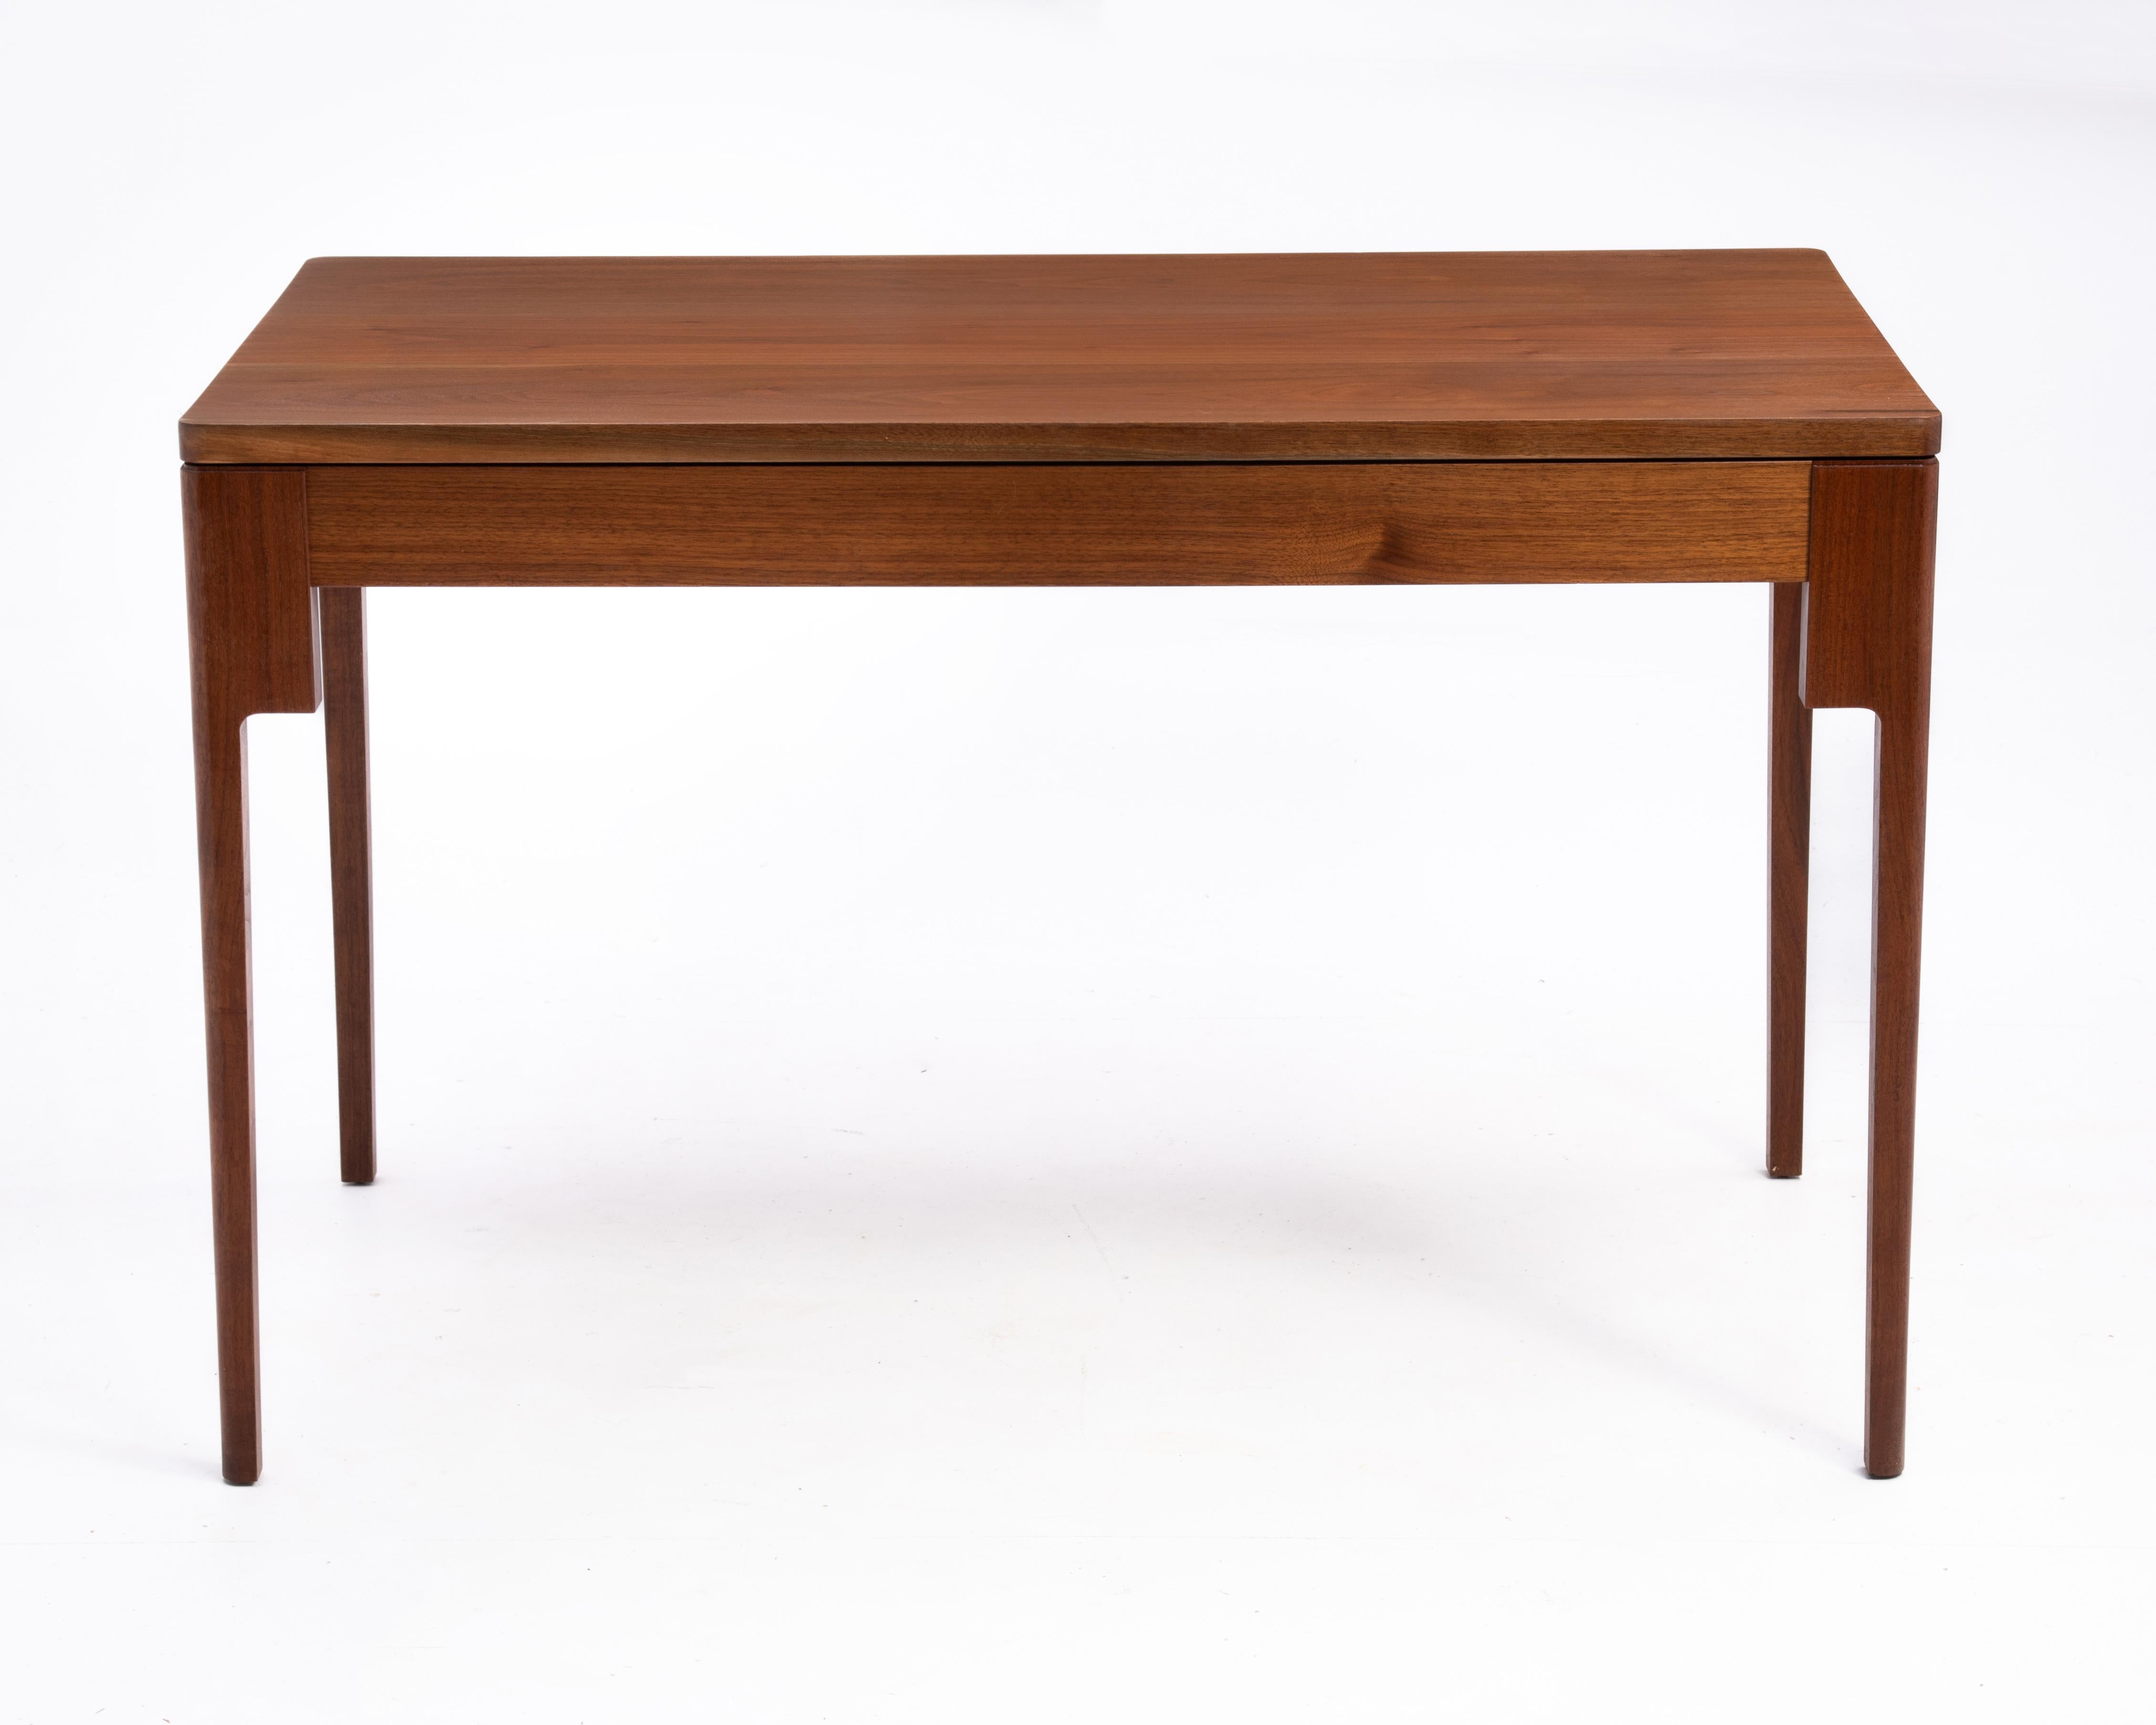 Bespoke Solid Walnut Desk Dining Table Floating Top Tapered Legs New Hope School In Good Condition For Sale In Forest Grove, PA